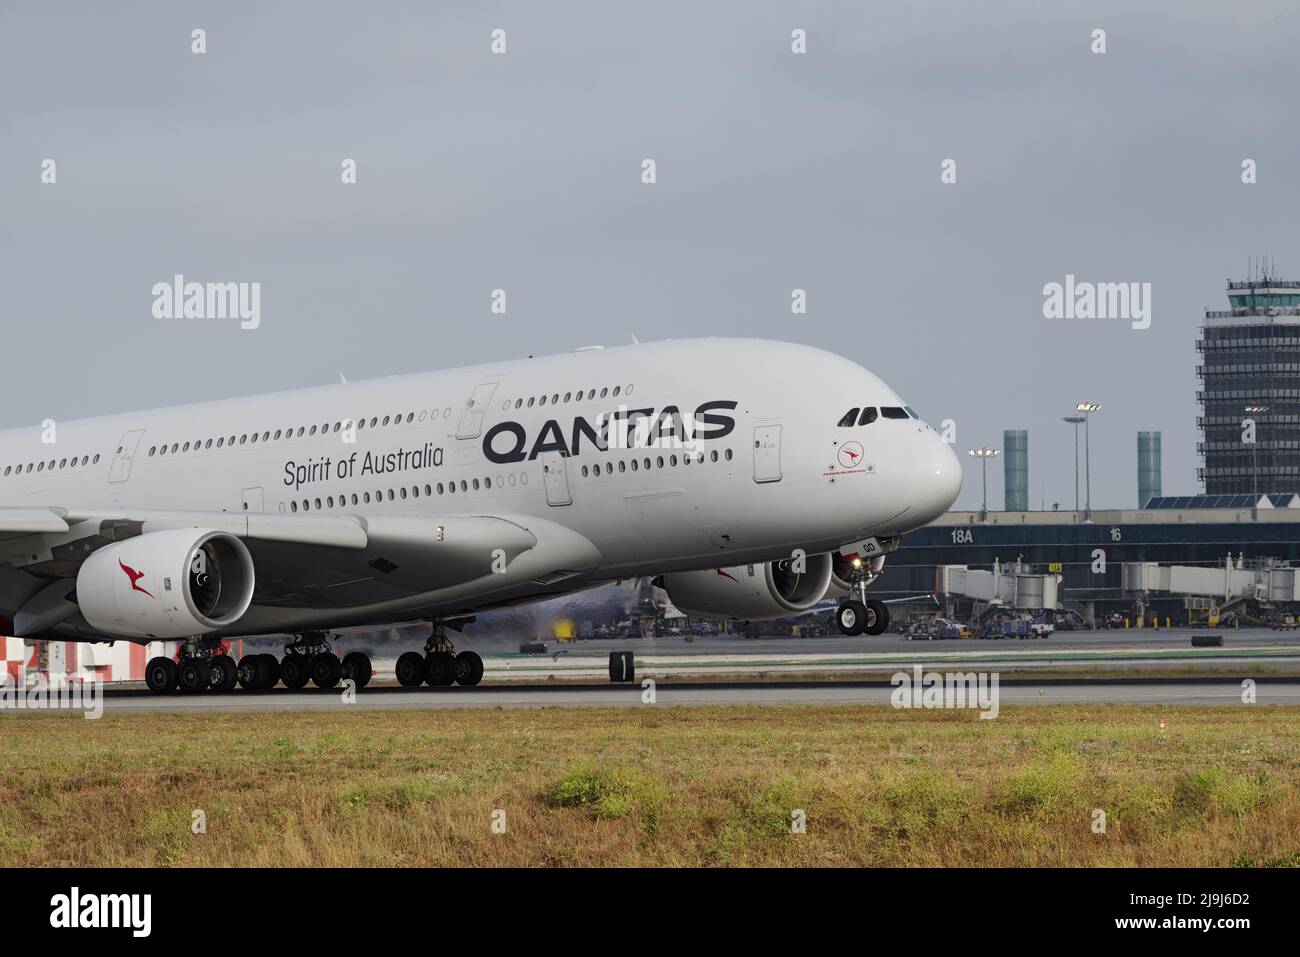 Image of Qantas Airbus A380-842 with registration VH-OQD shown touching down at Los Angeles International Airport, LAX. Stock Photo